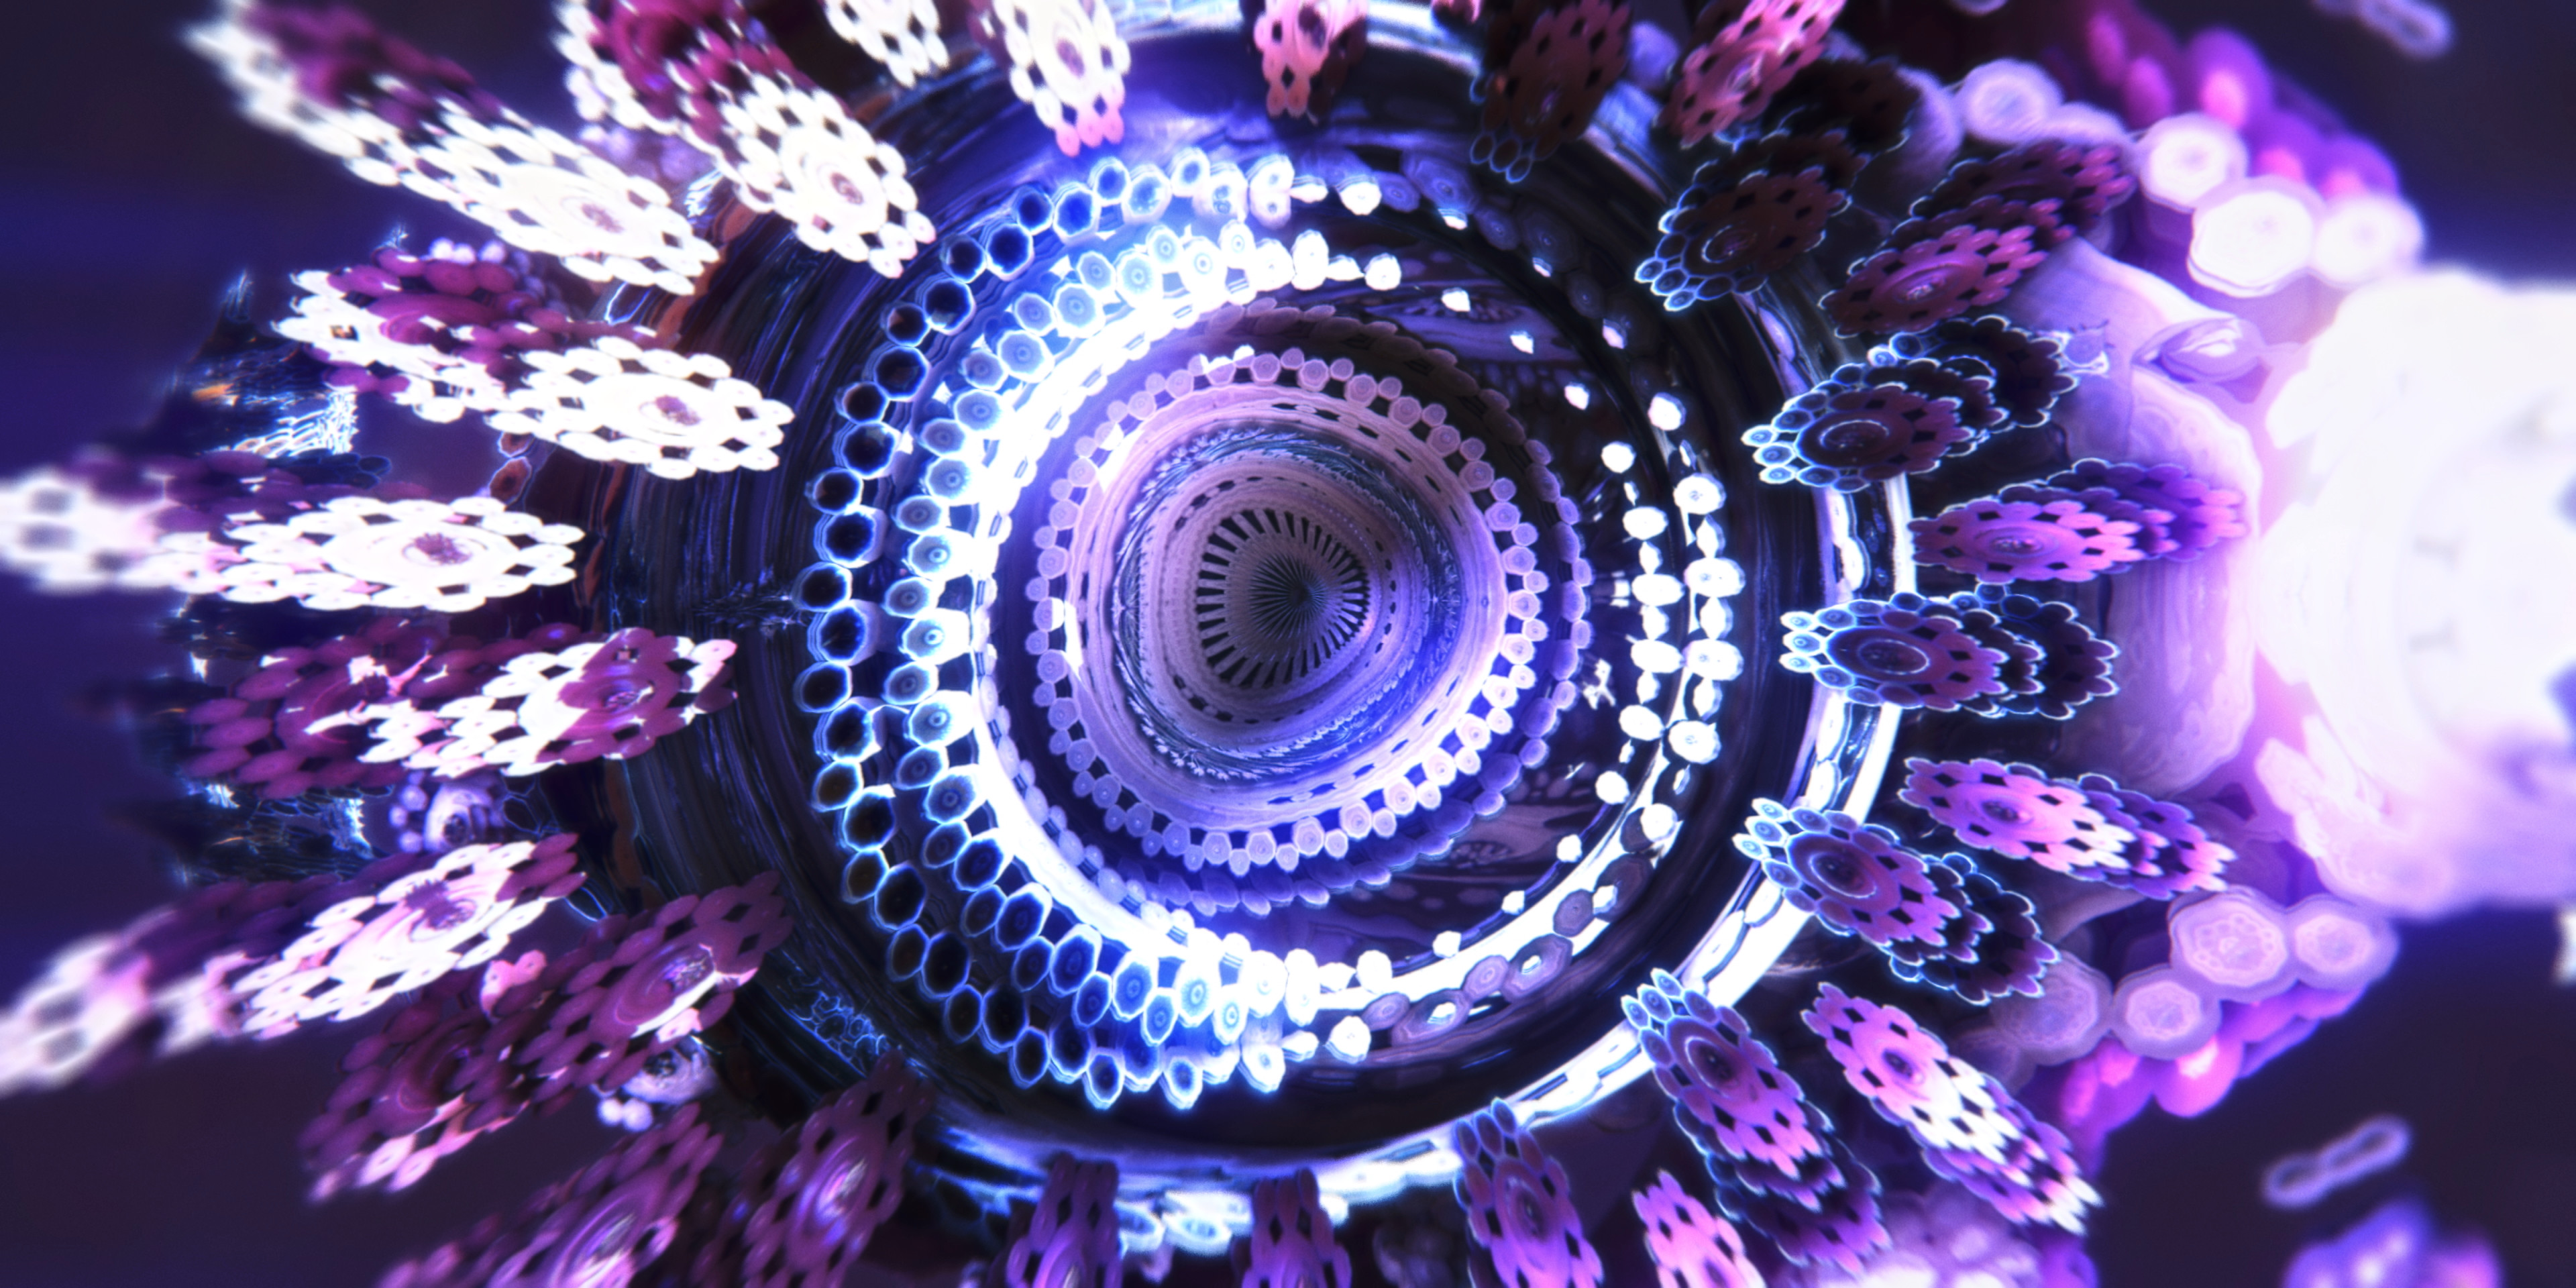 - Fractal imagery rendered in Mandelbulb 3D v1.91
- Compositing in After ffects CC 2018